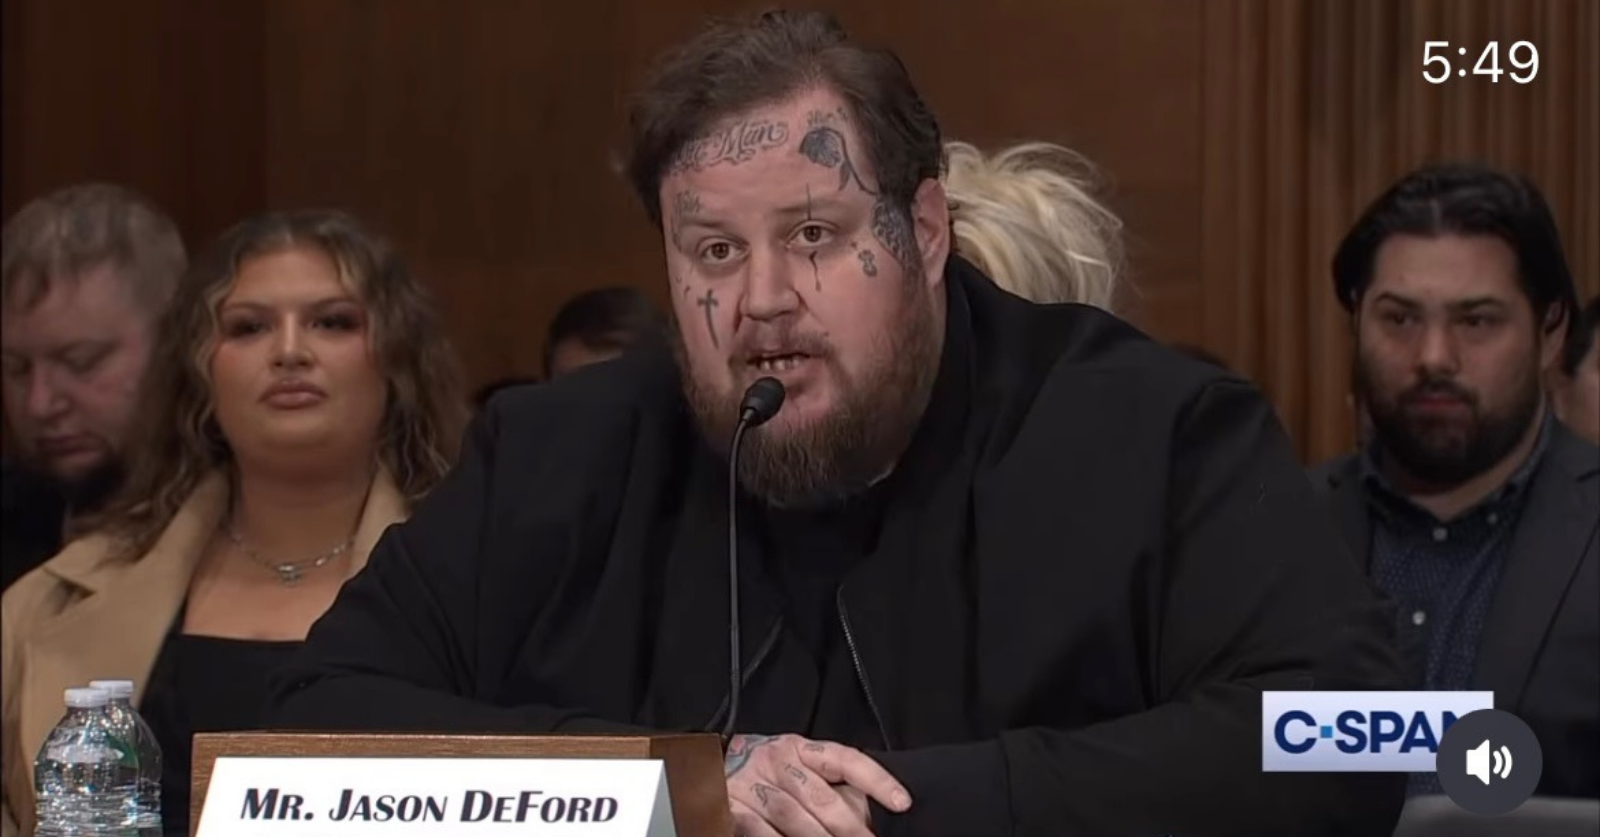 ‘At every concert I perform, I witness the heartbreaking impact of fentanyl.’ – Reaction to country music star Jelly Roll’s eye-opening testimony